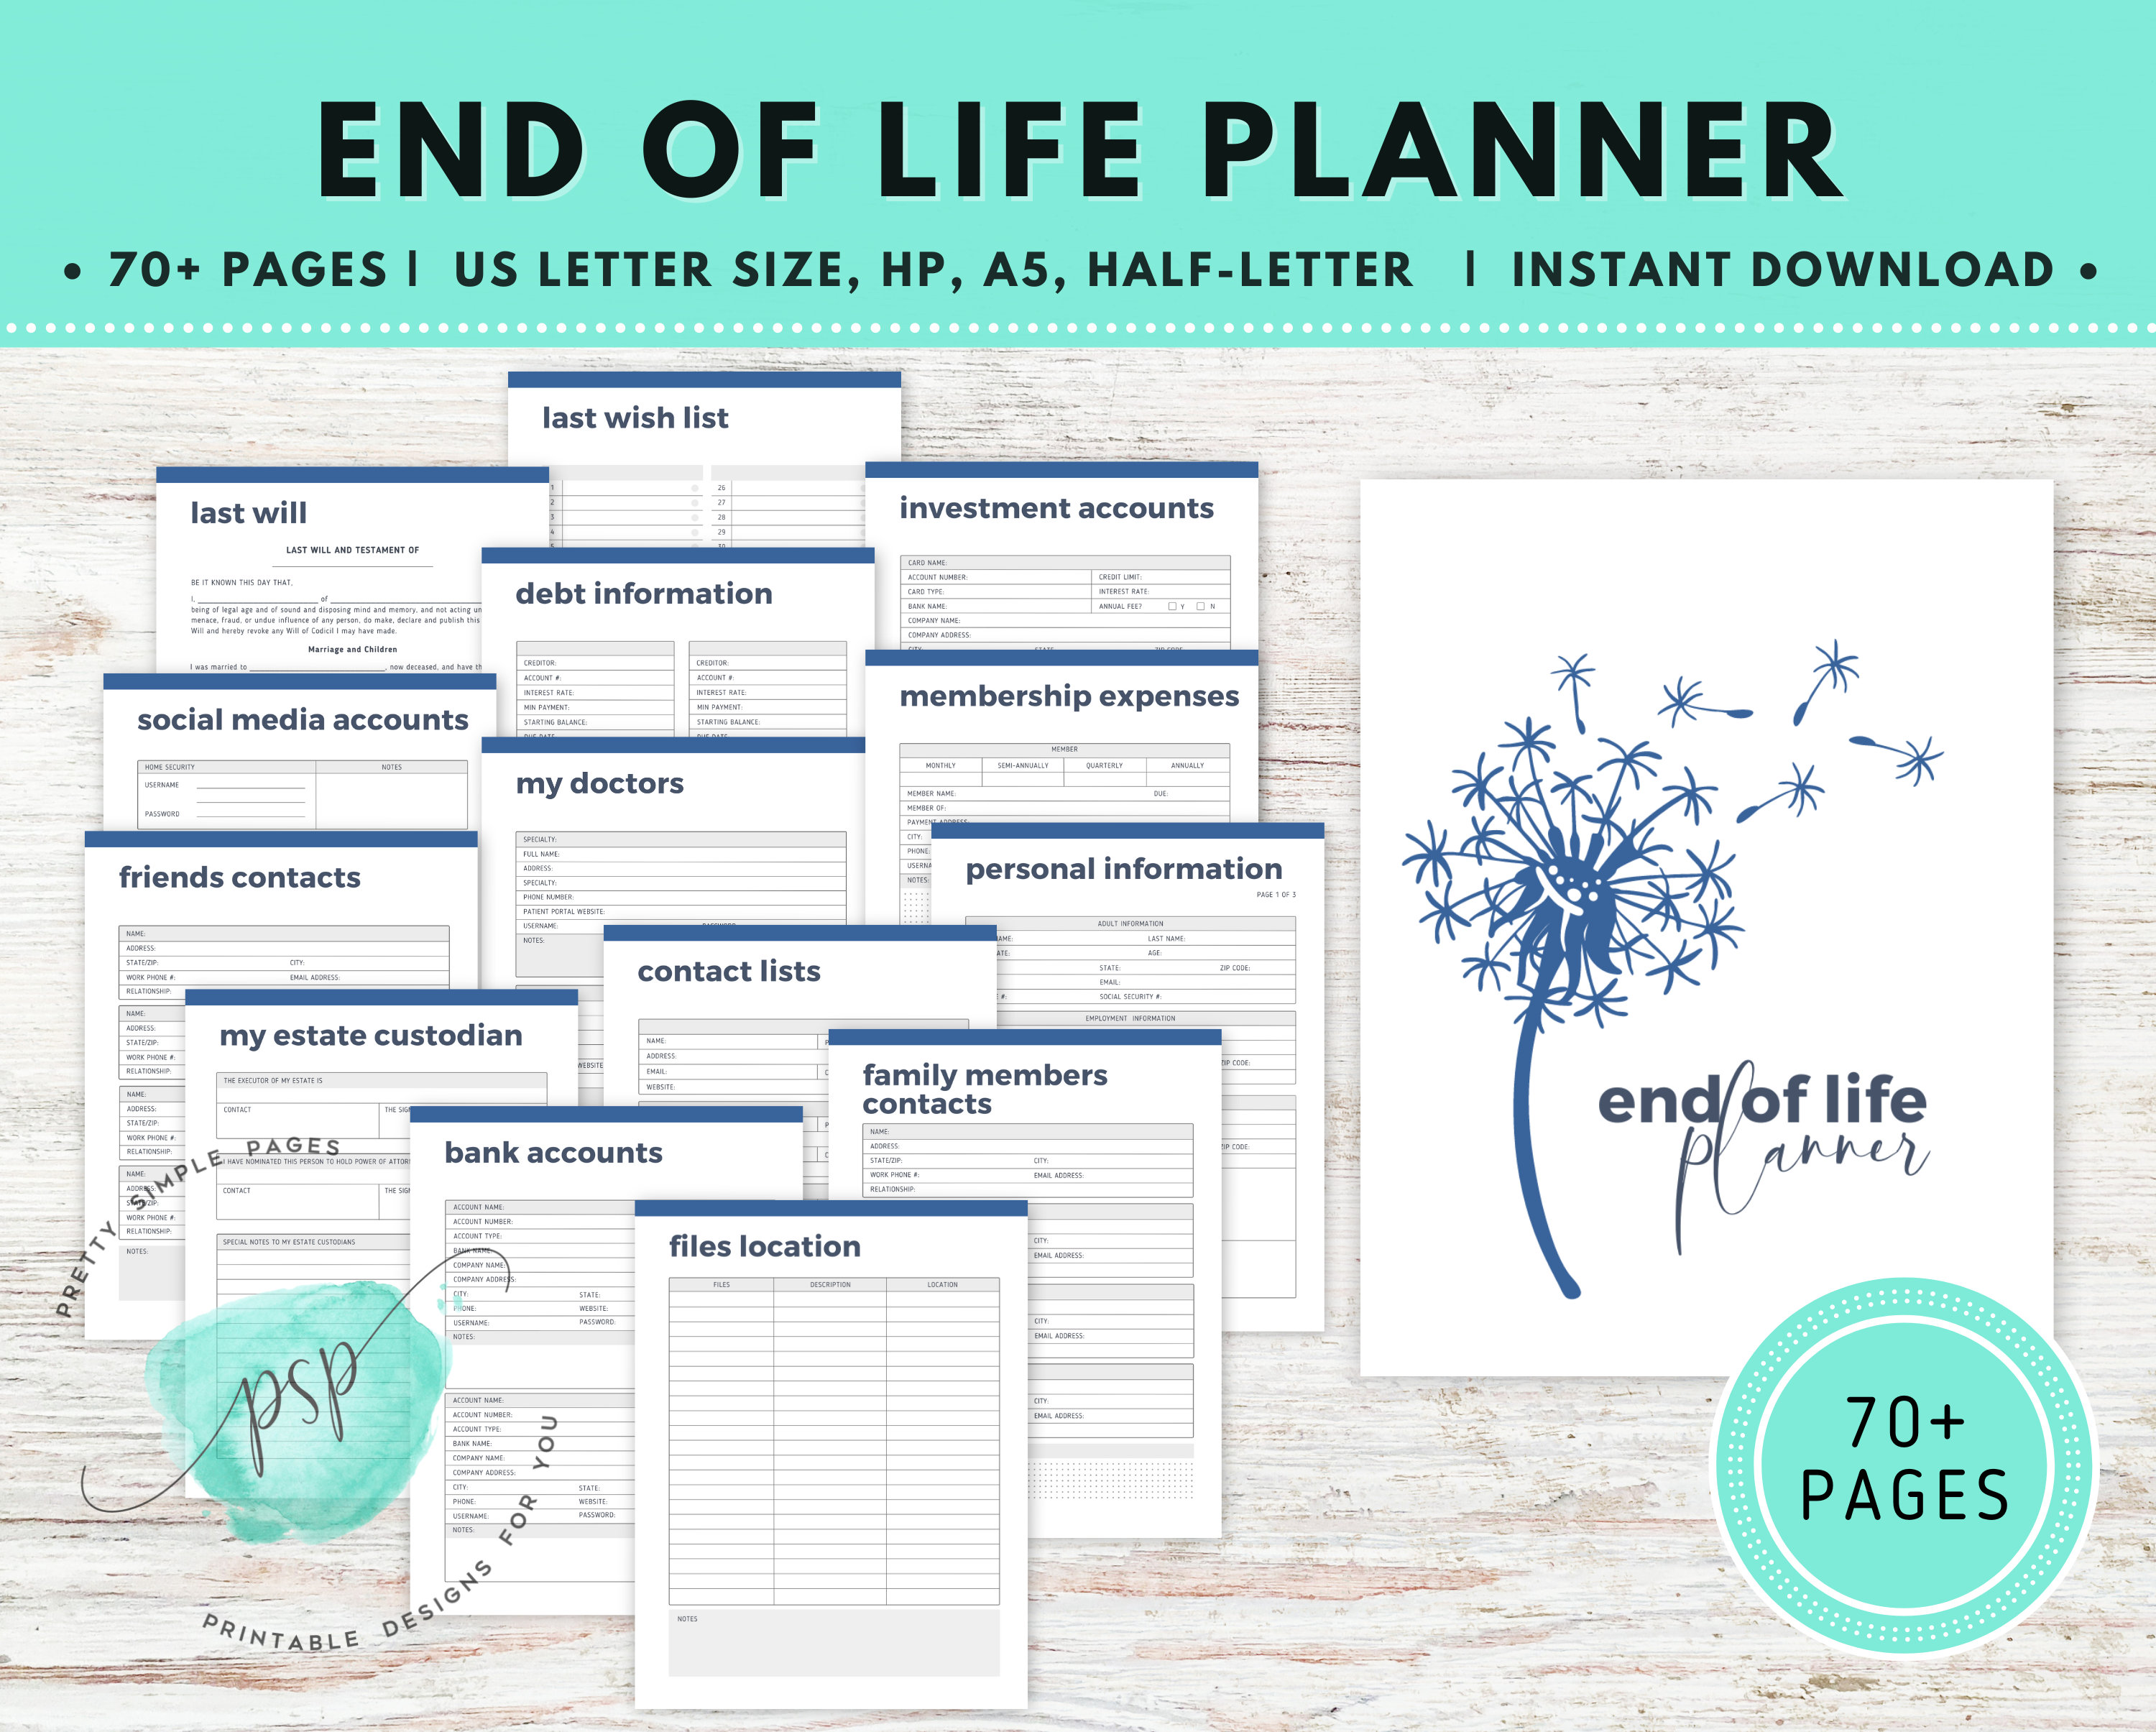 What To Do When I Die: Planner & Organizer Book - A Death Planning Guide  for What My Family Need to Know & Do When I'm gone for My Belongings